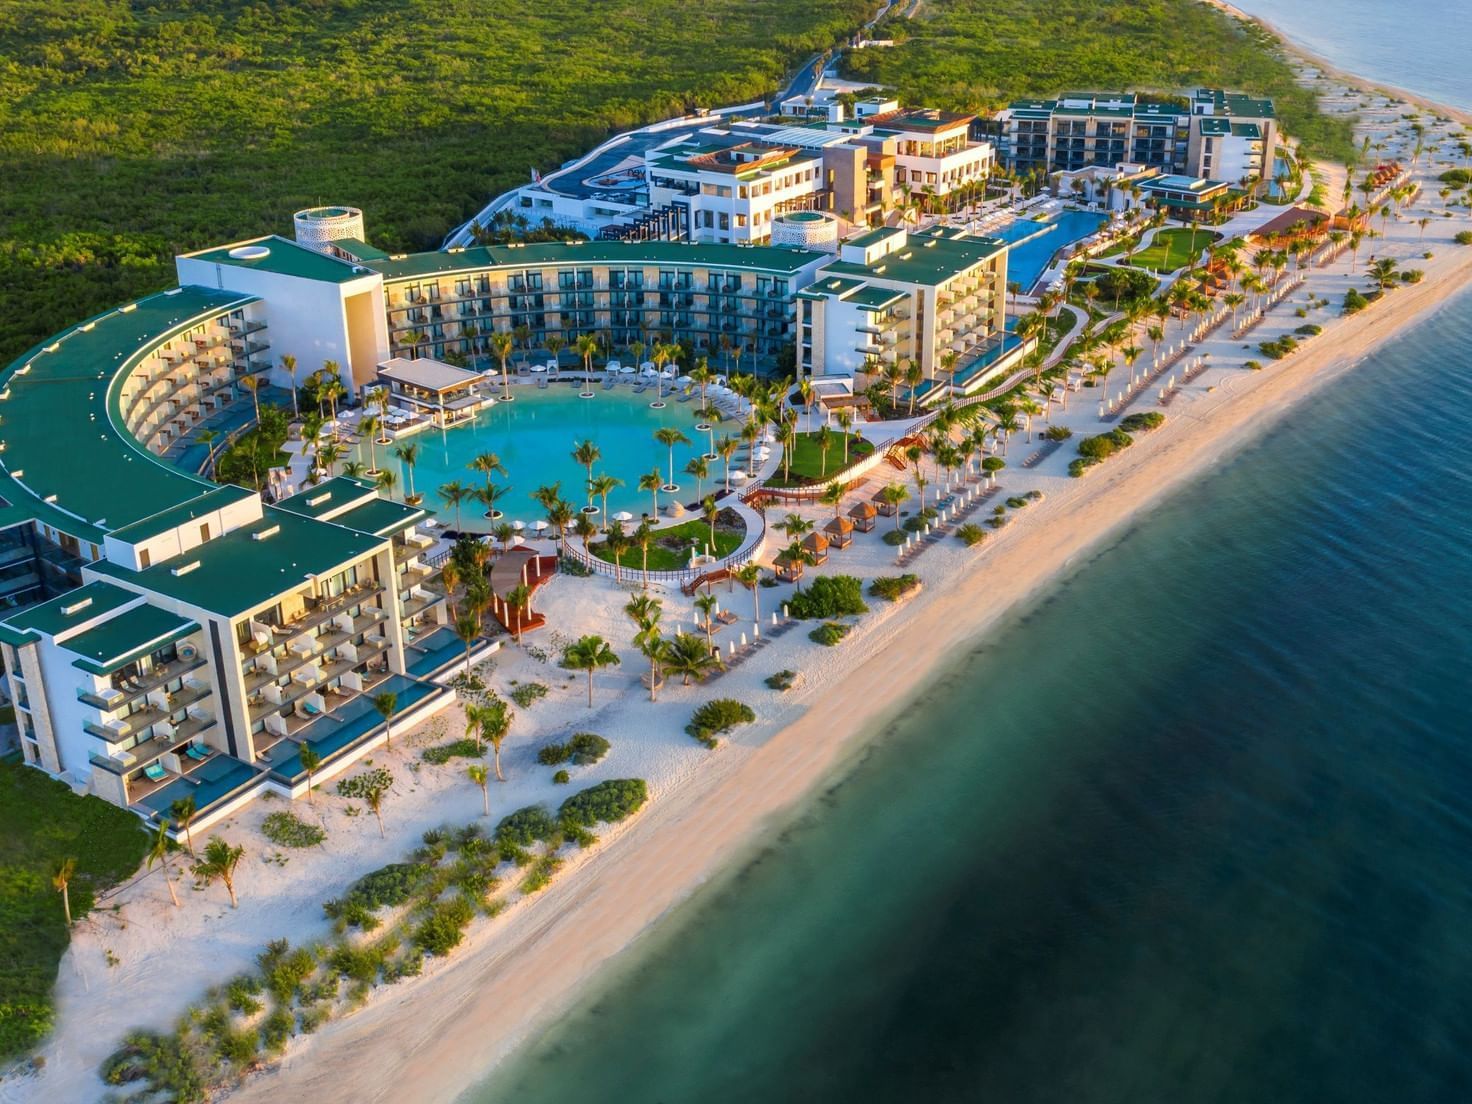 Aerial view of the pool and hotel Haven Riviera Cancun